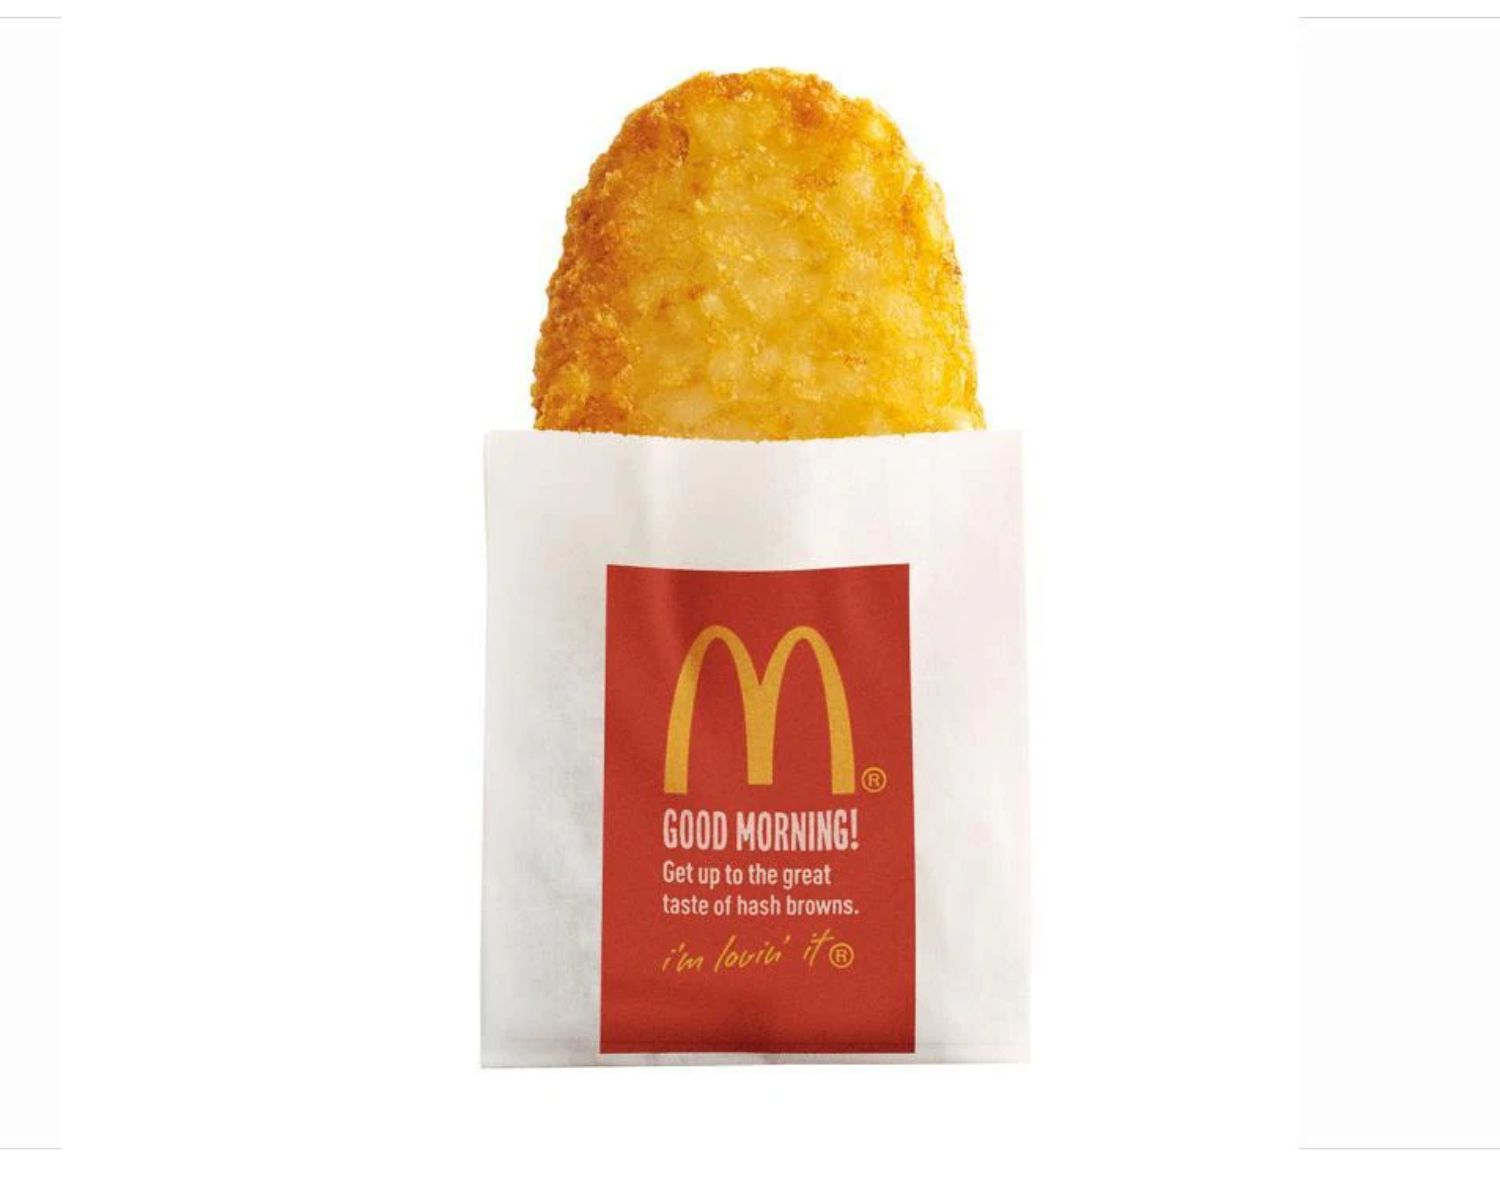 19-mcdonalds-hash-brown-nutrition-facts